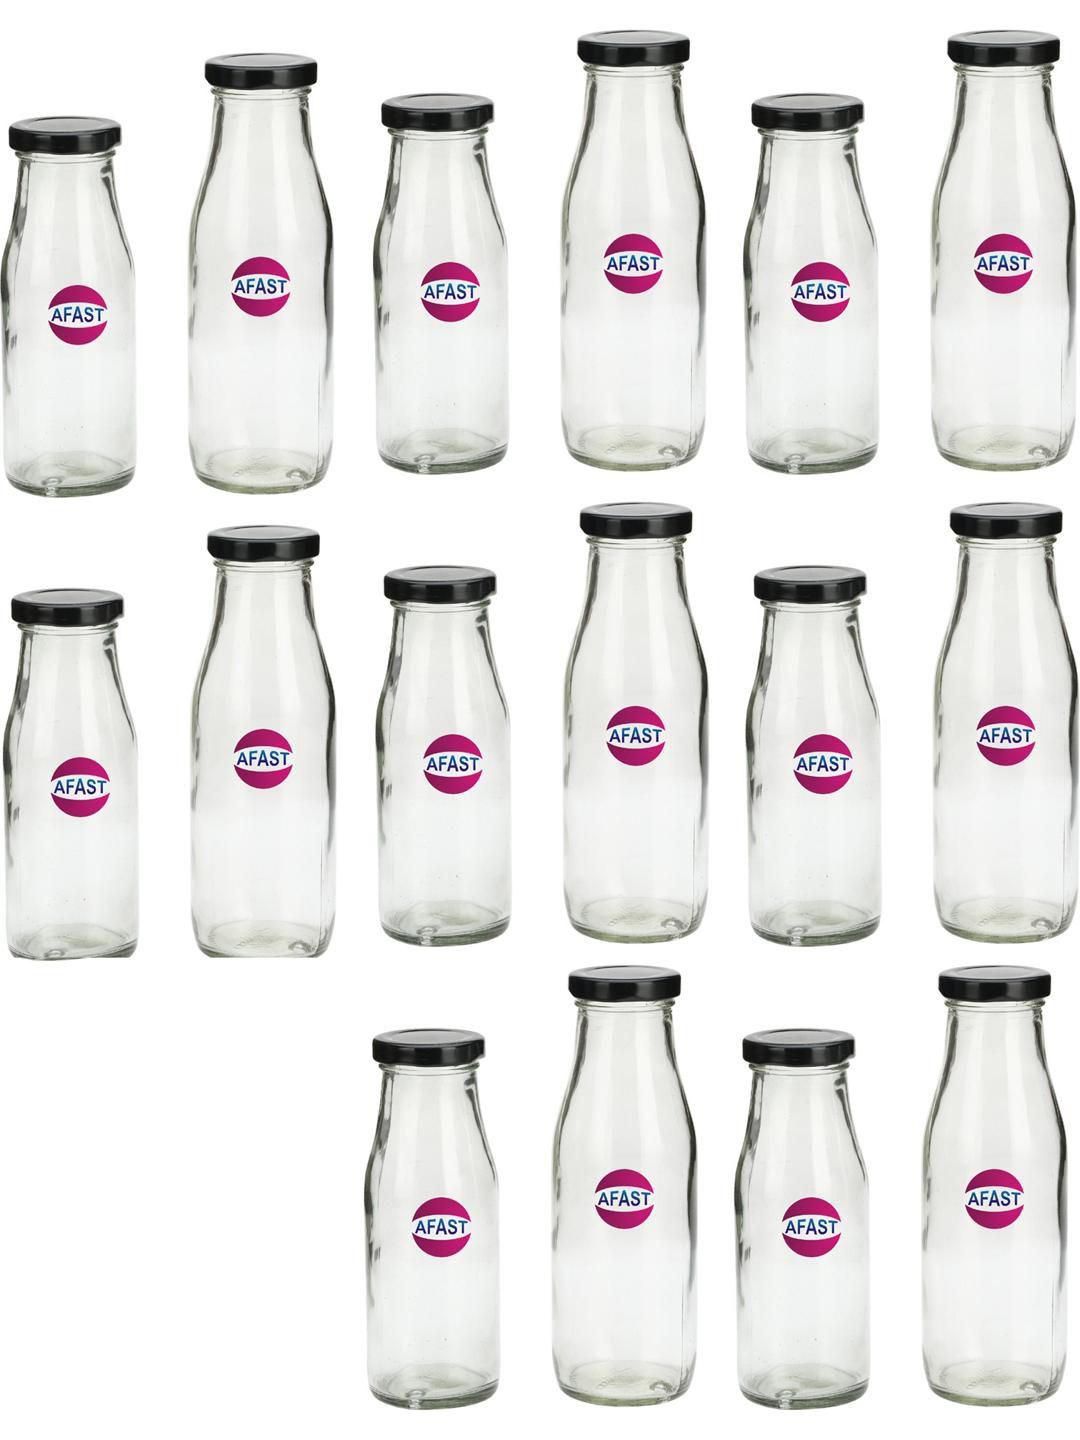     			AFAST Multipurpose Bottle Glass Transparent Utility Container ( Set of 16 )